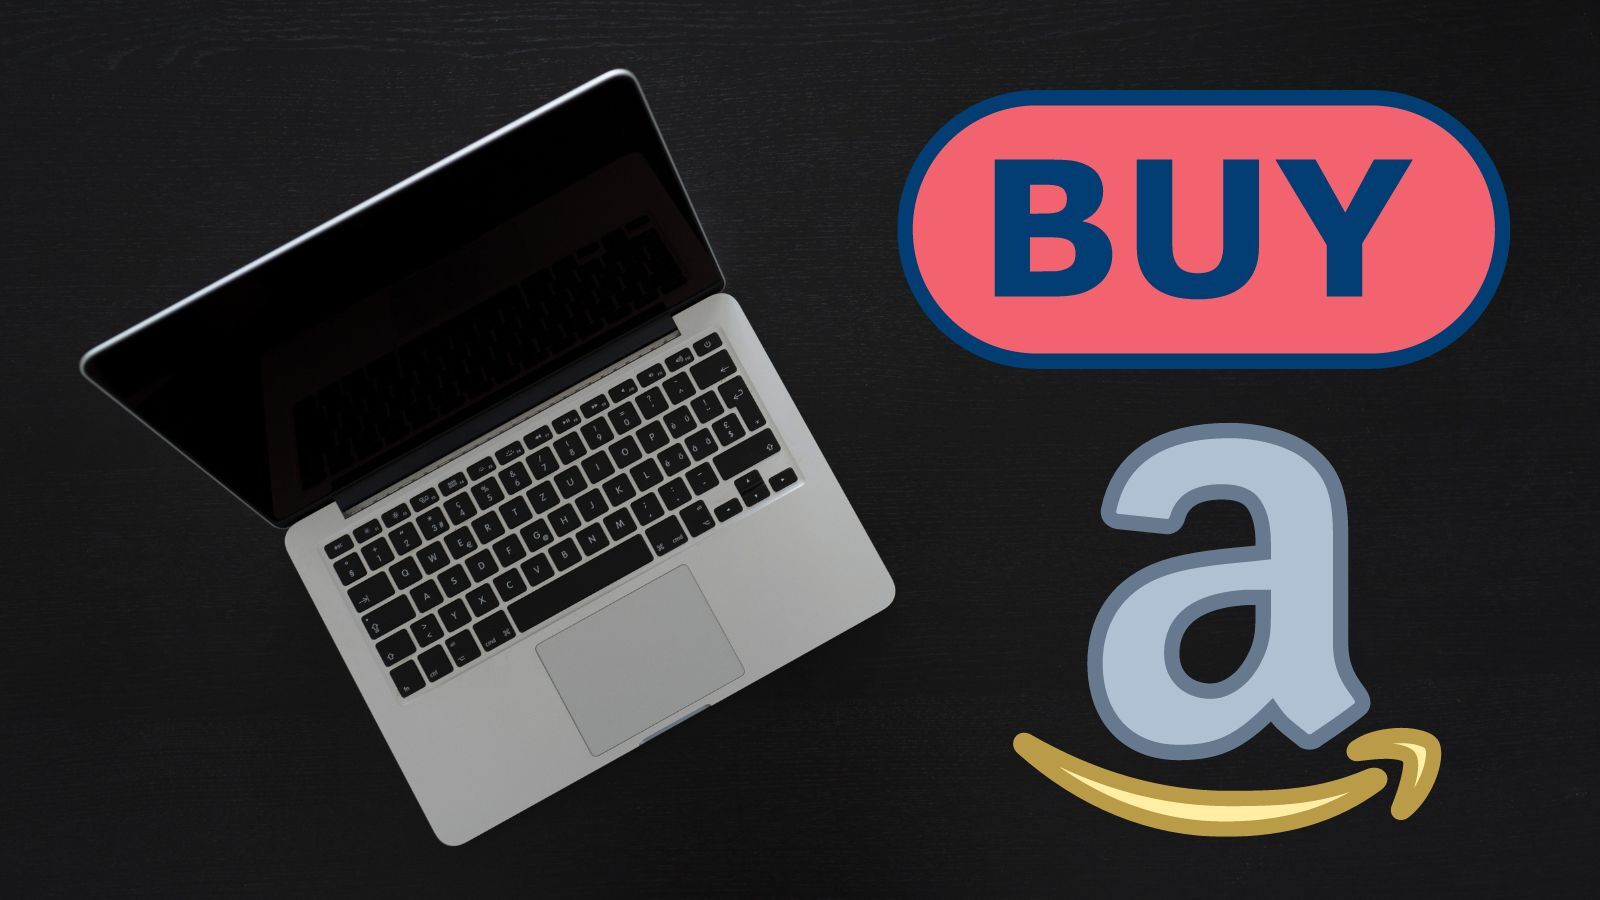 Buying a MacBook on Amazon (All You Need to Know!)